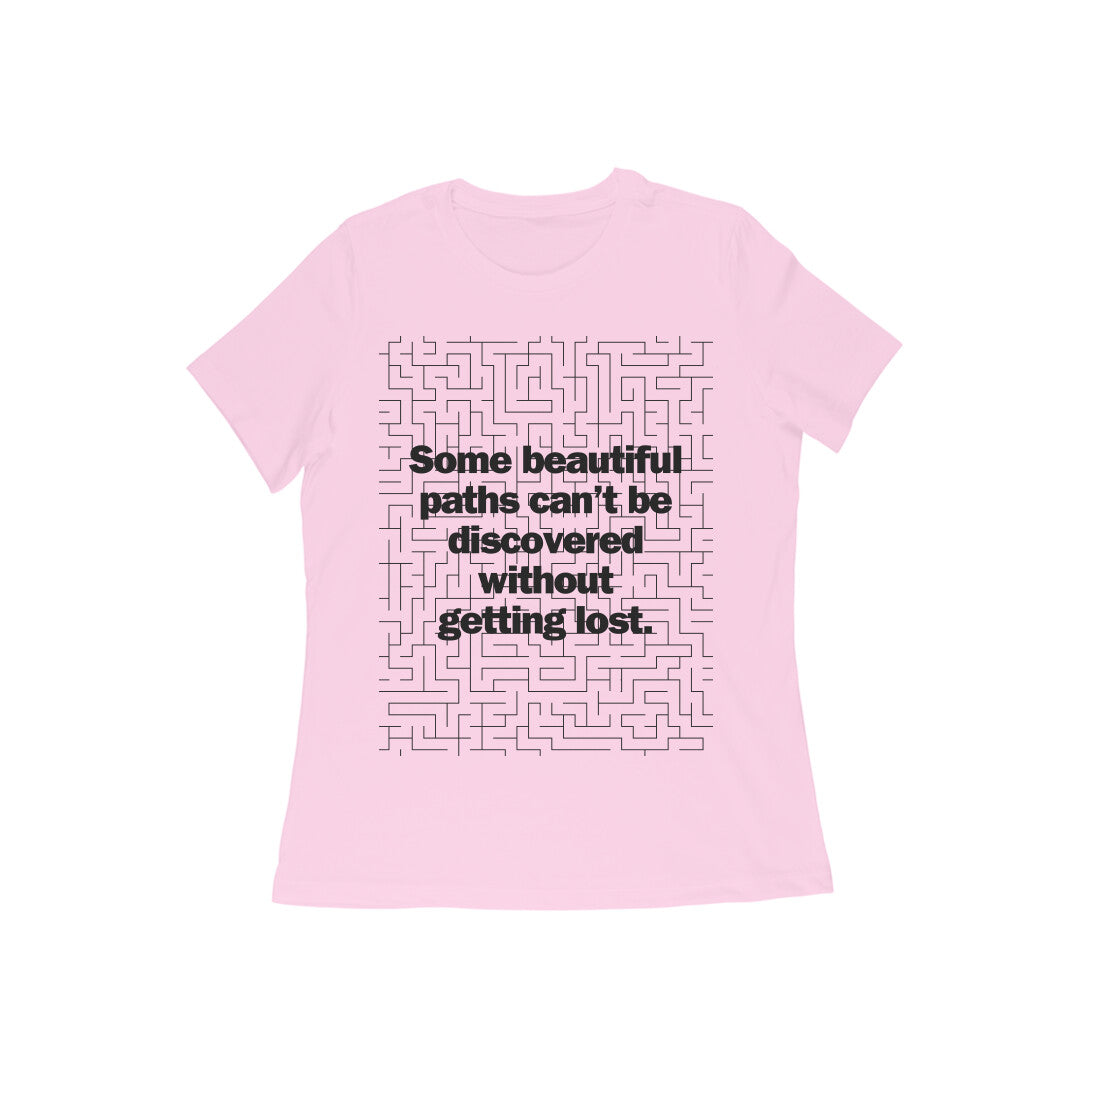 Some beautiful paths can't be discovered without getting lost. Black Text Women's T-shirt